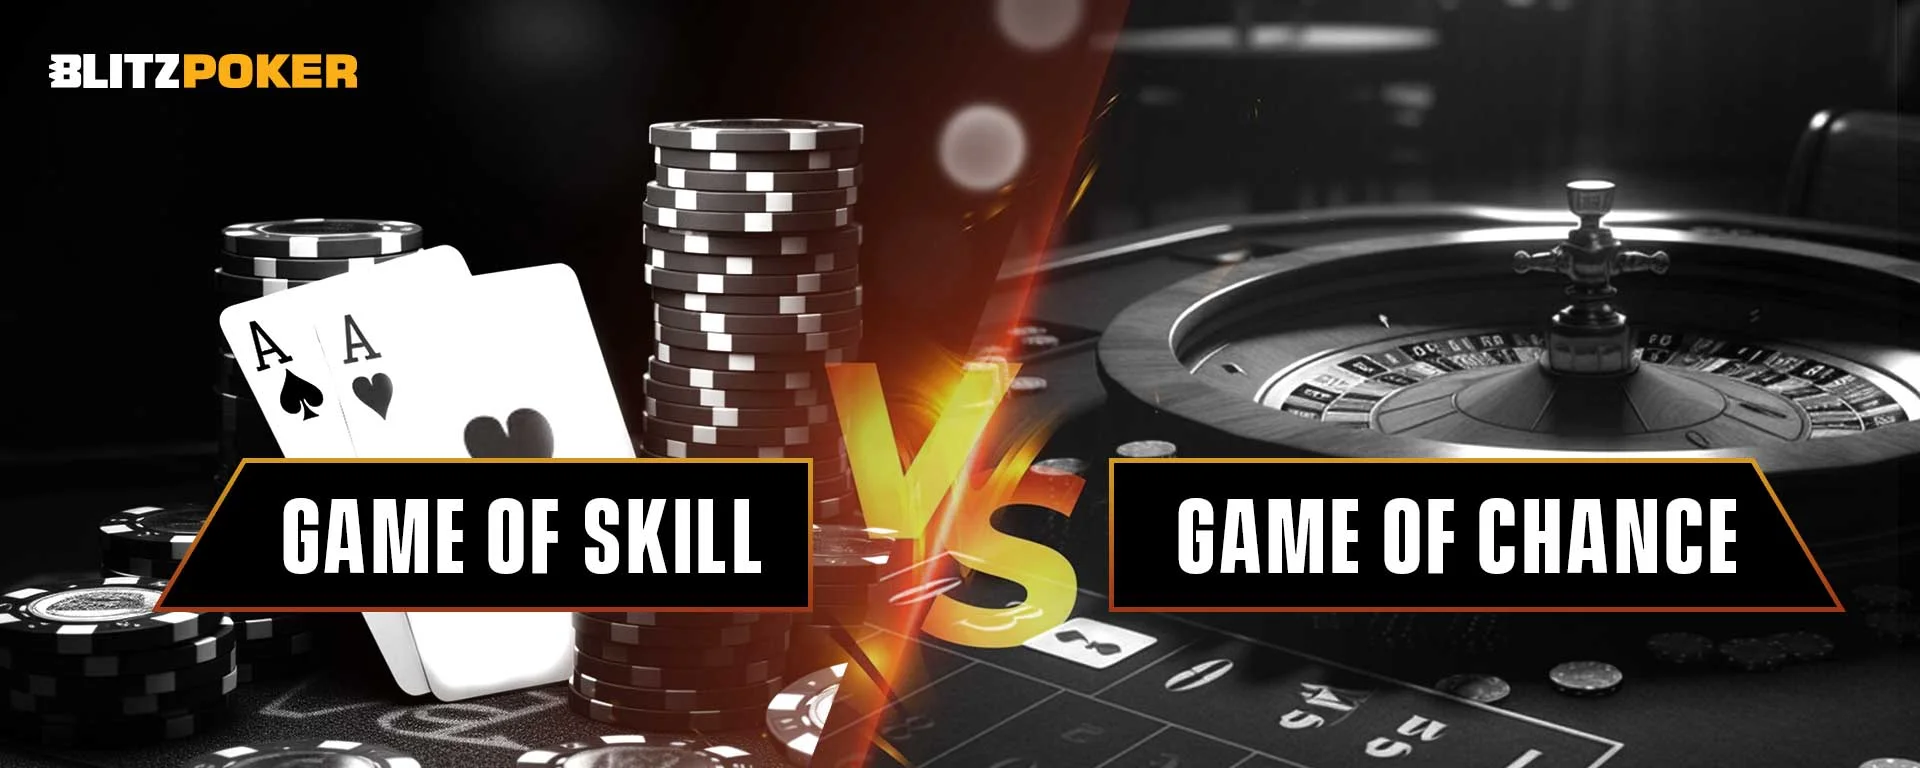 Game of Skill Vs Game of Chance